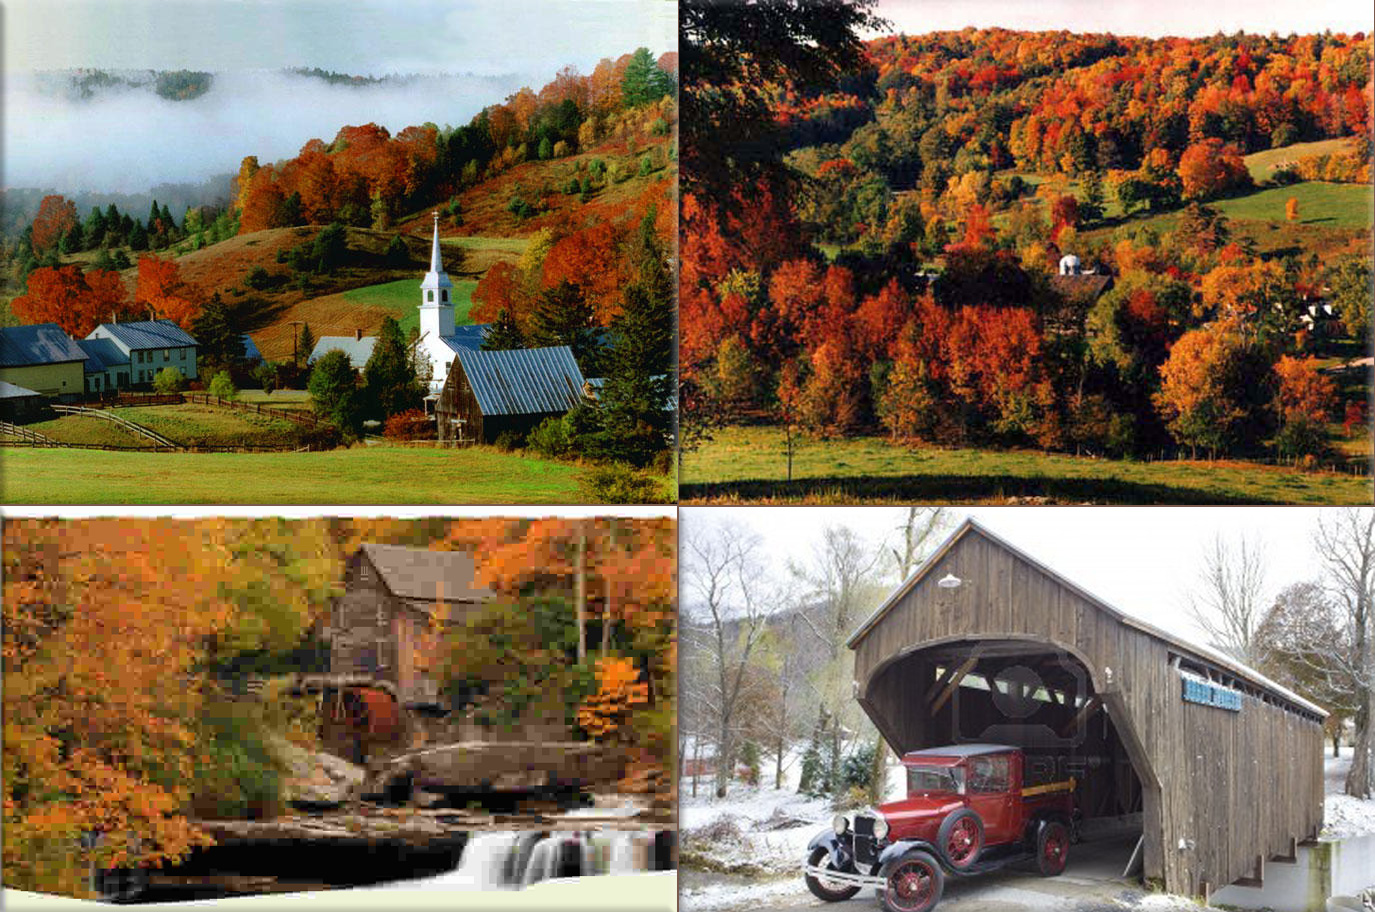 Vermont is a state in the New England region of the northeastern United States